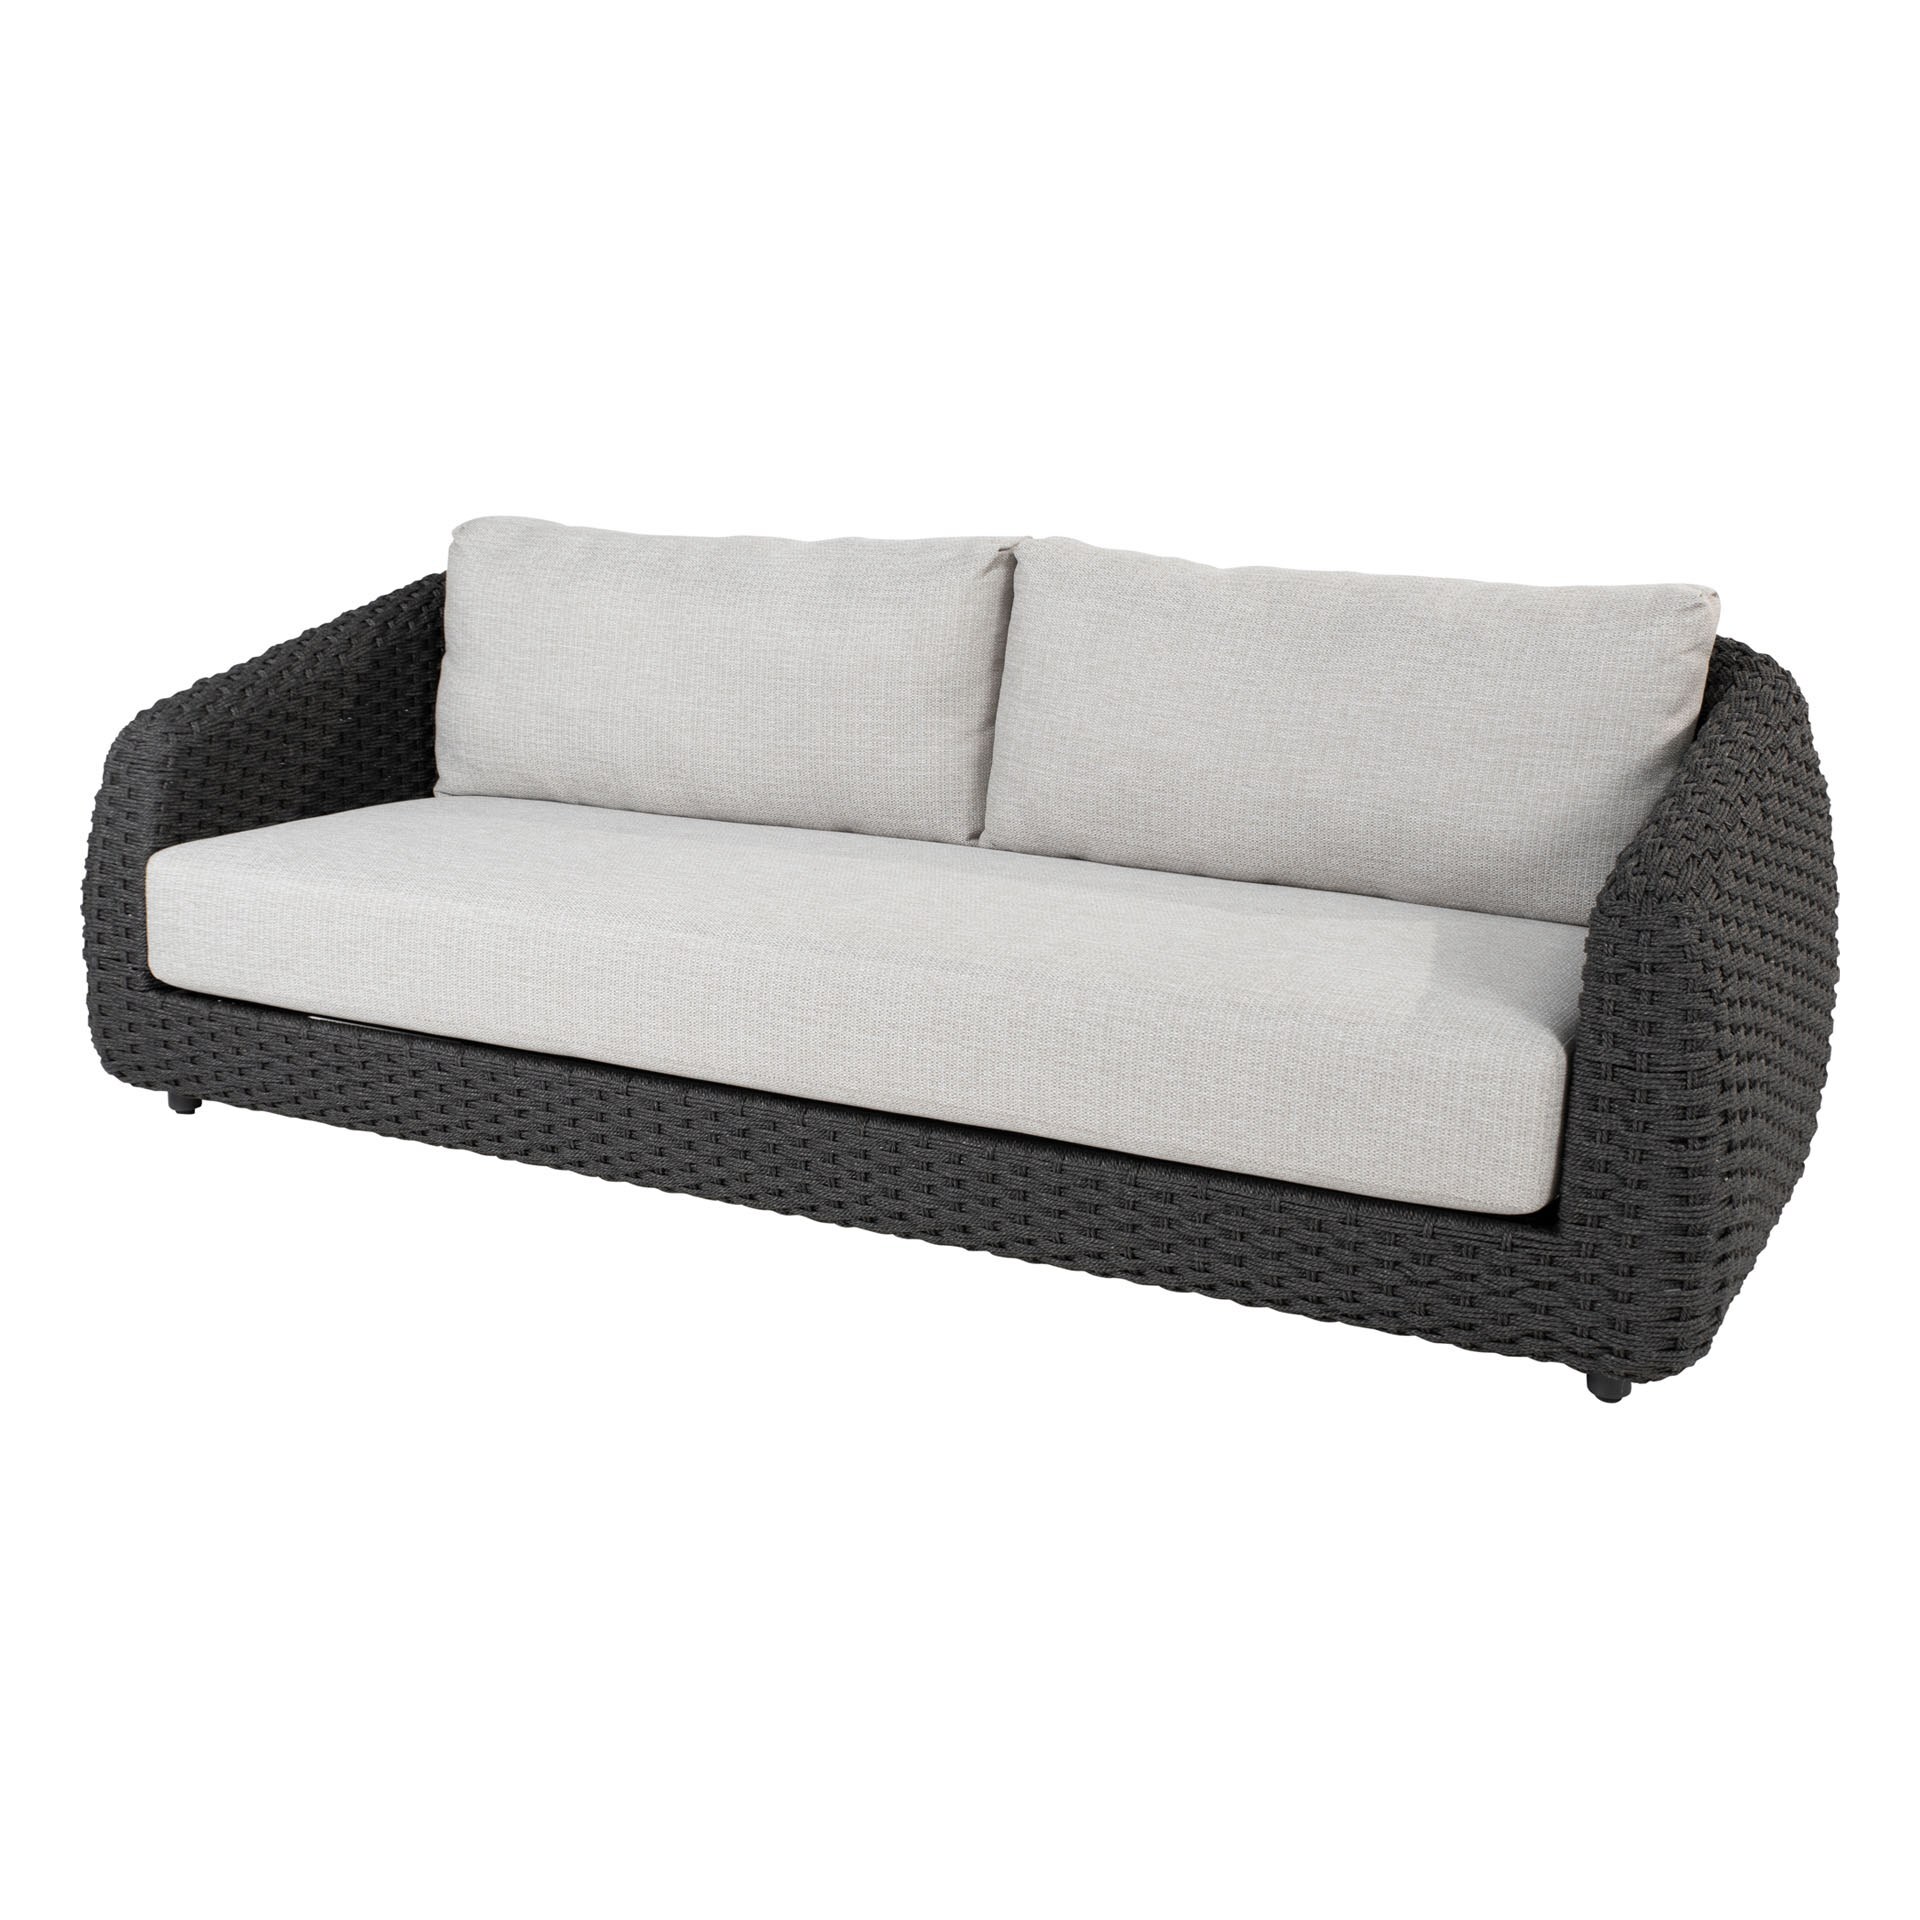 Saint-Tropez Living Bench 3 seater with 3 cushions 